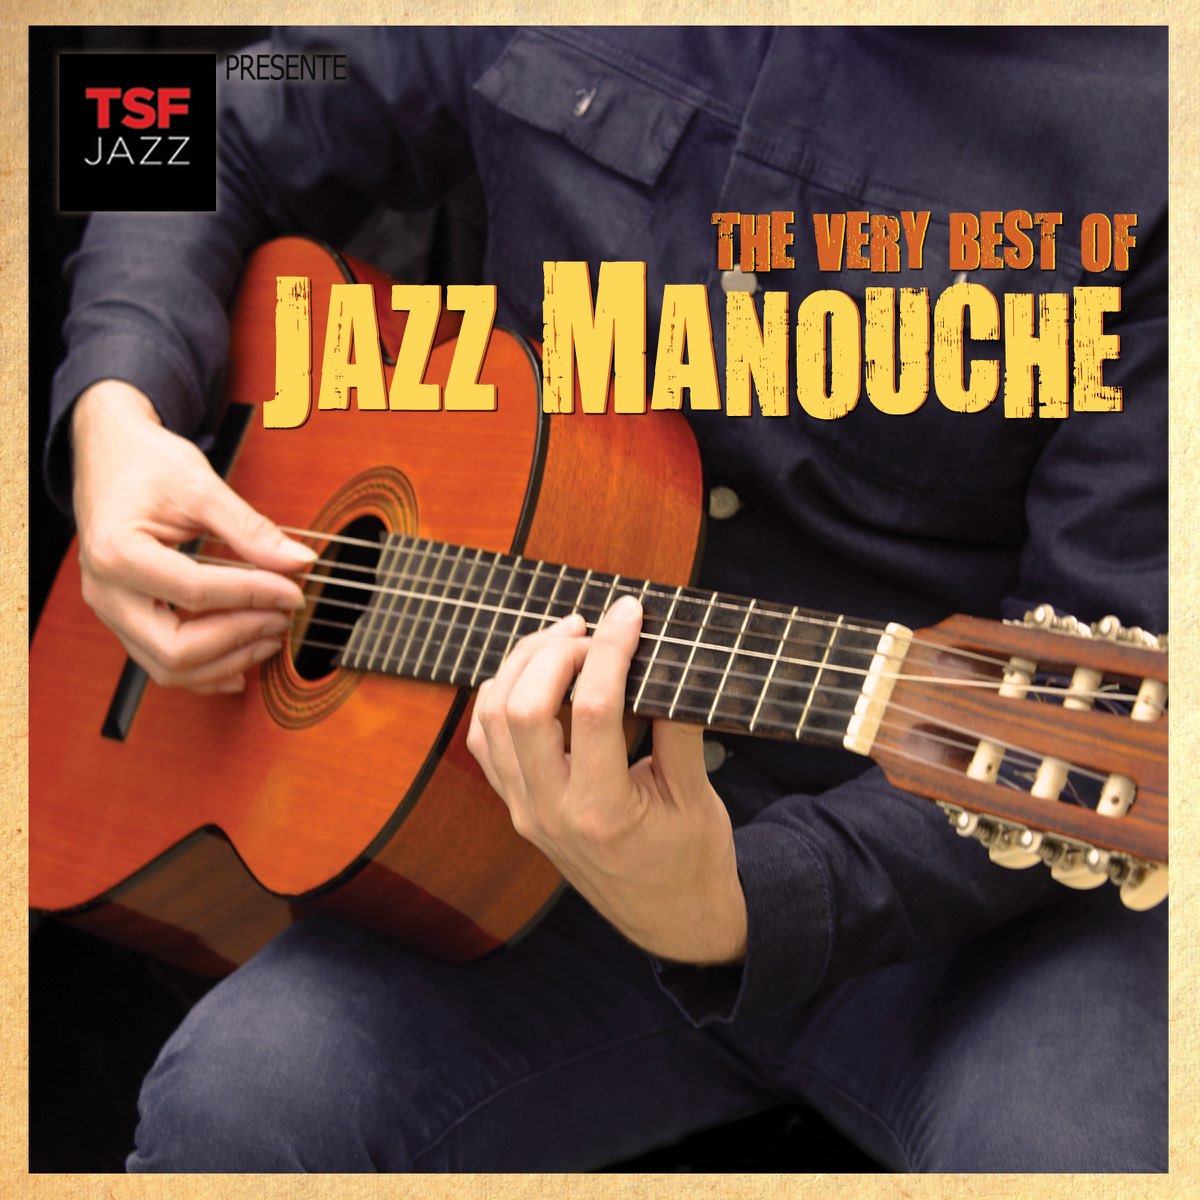 The Very Best of Jazz Manouche by Various Artists on Apple Music